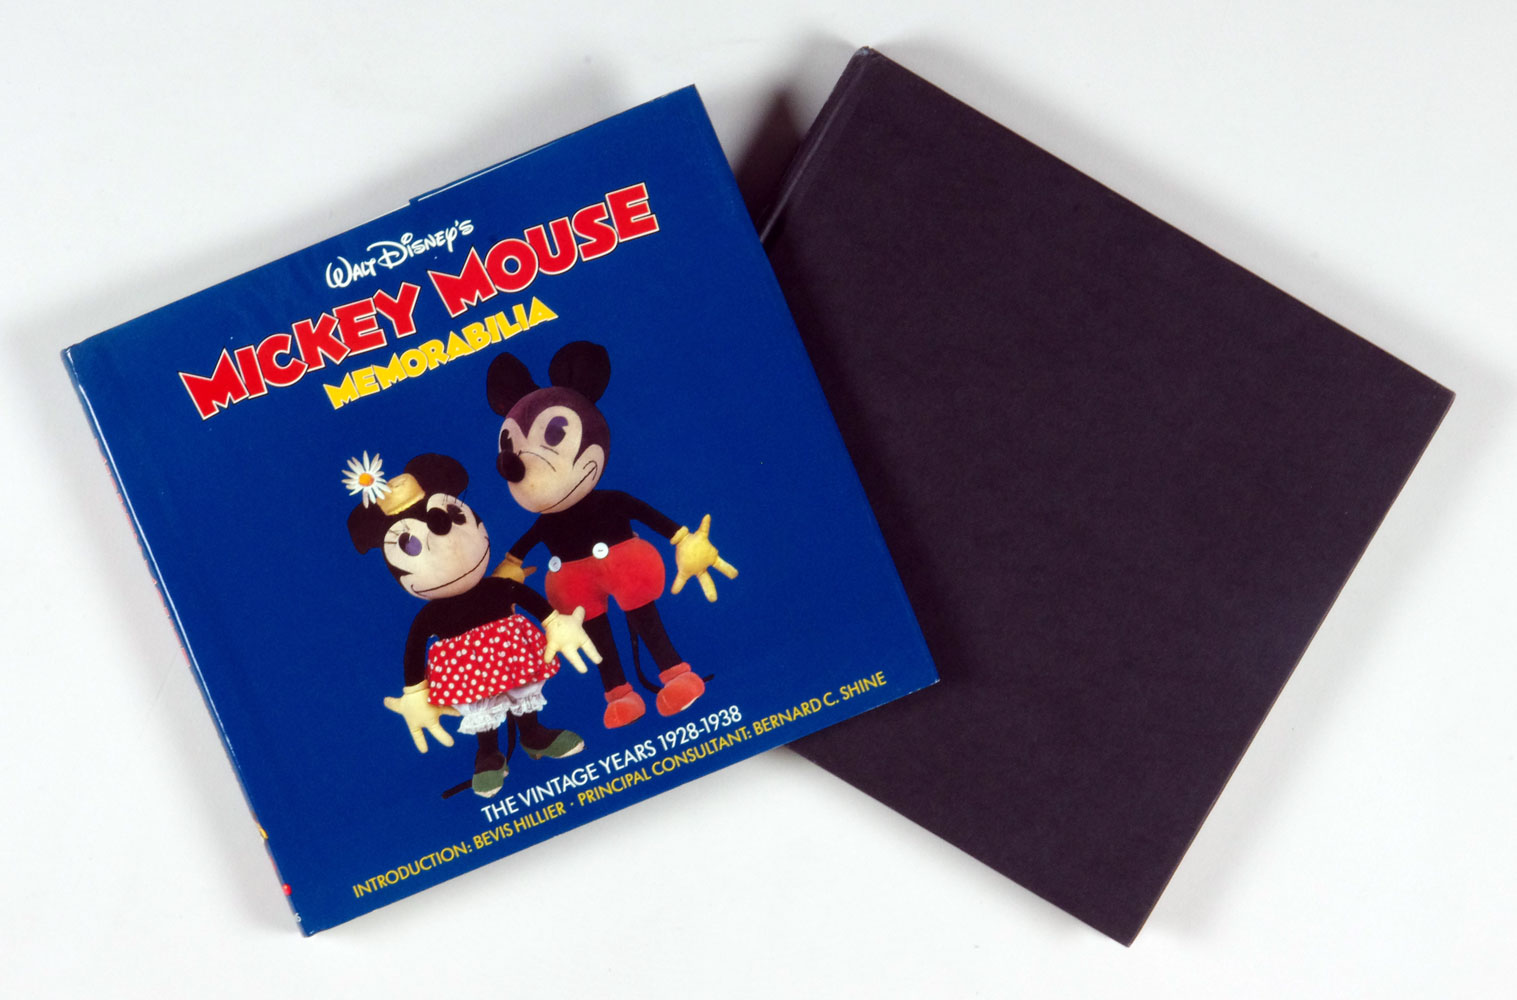 Mickey Mouse Memorabilia The Vintage Years 1928-1938 Hard Cover w/ Dust Jacket